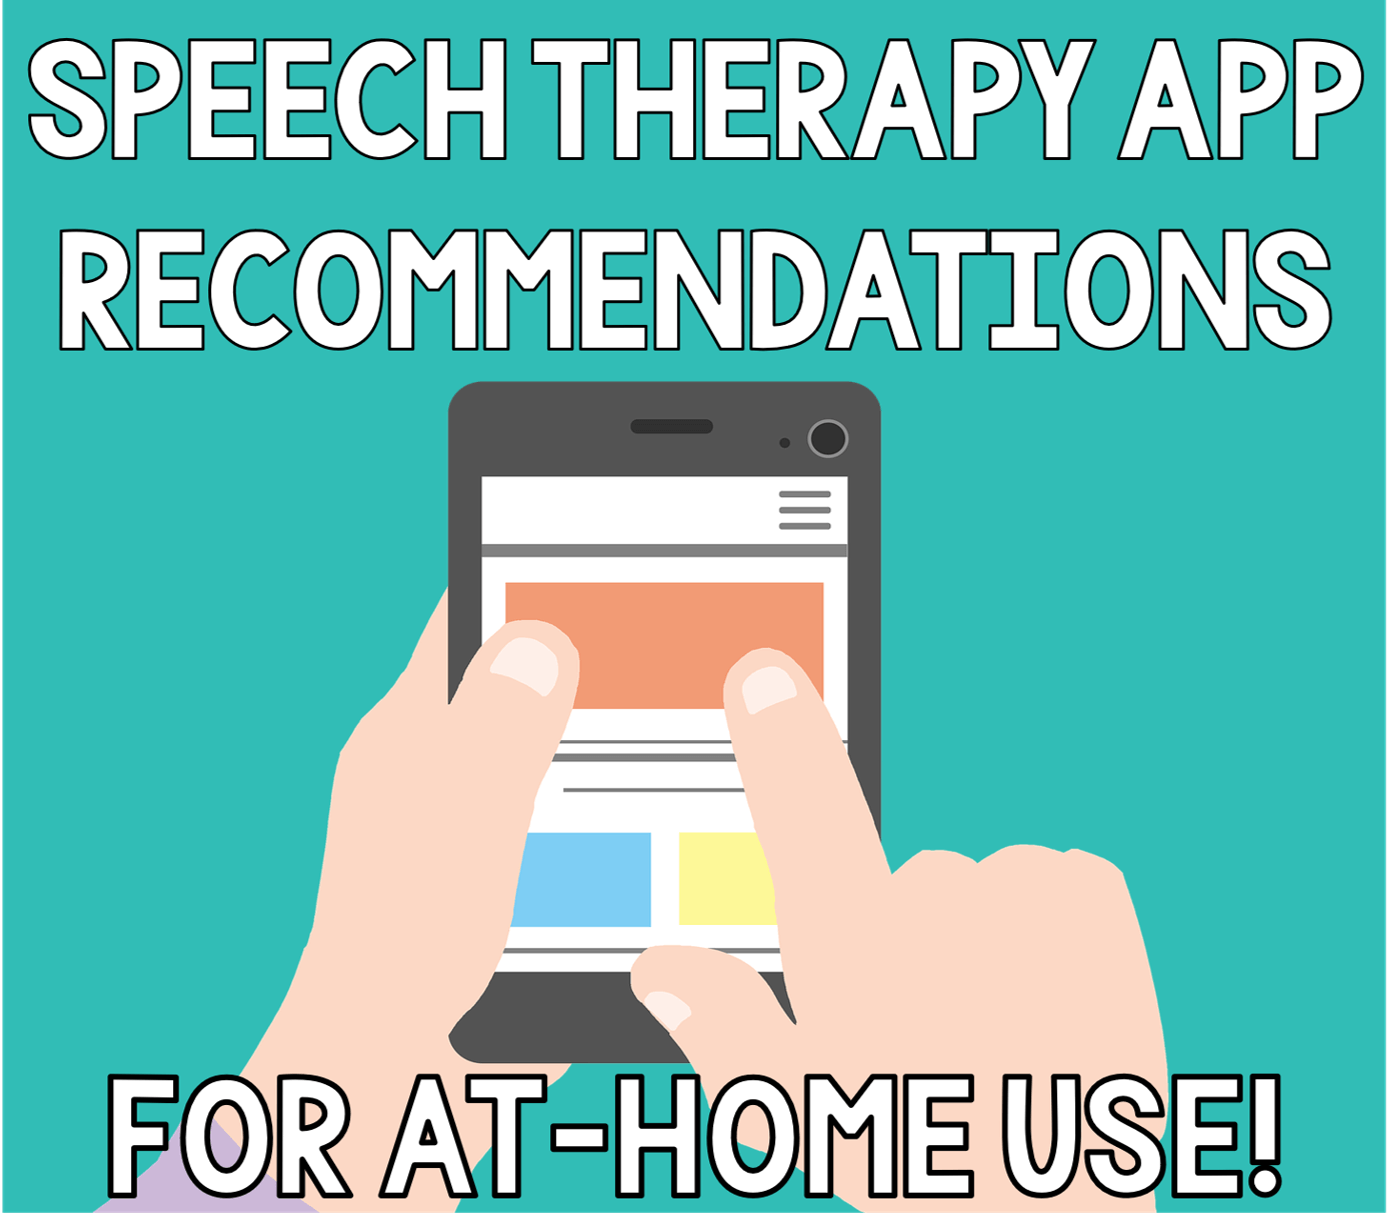 Speech Therapy Apps: A Helpful Guide for SLPs